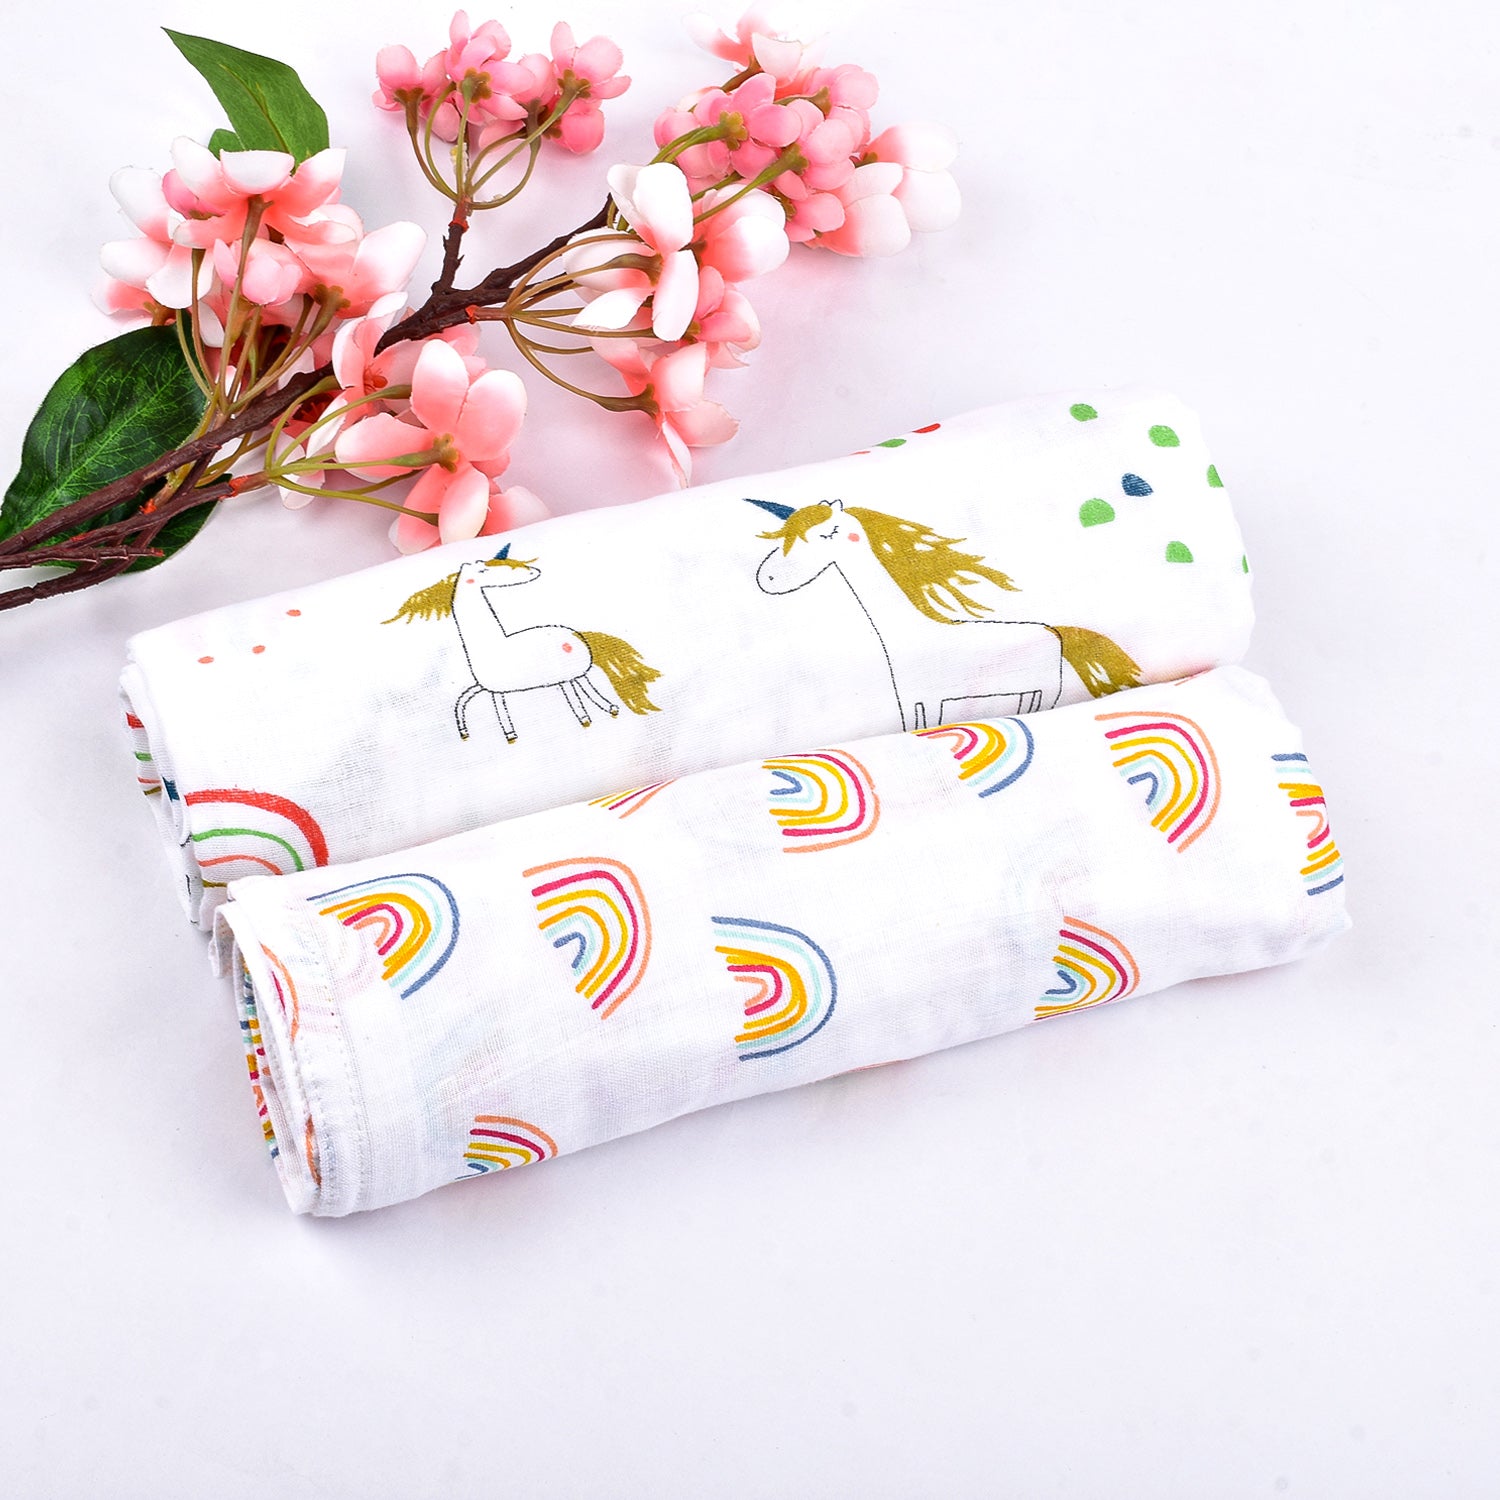 Baby Muslin Cloth Swaddle - 0-12 Months,  Pack of 2 (Unicorn & Rainbow)